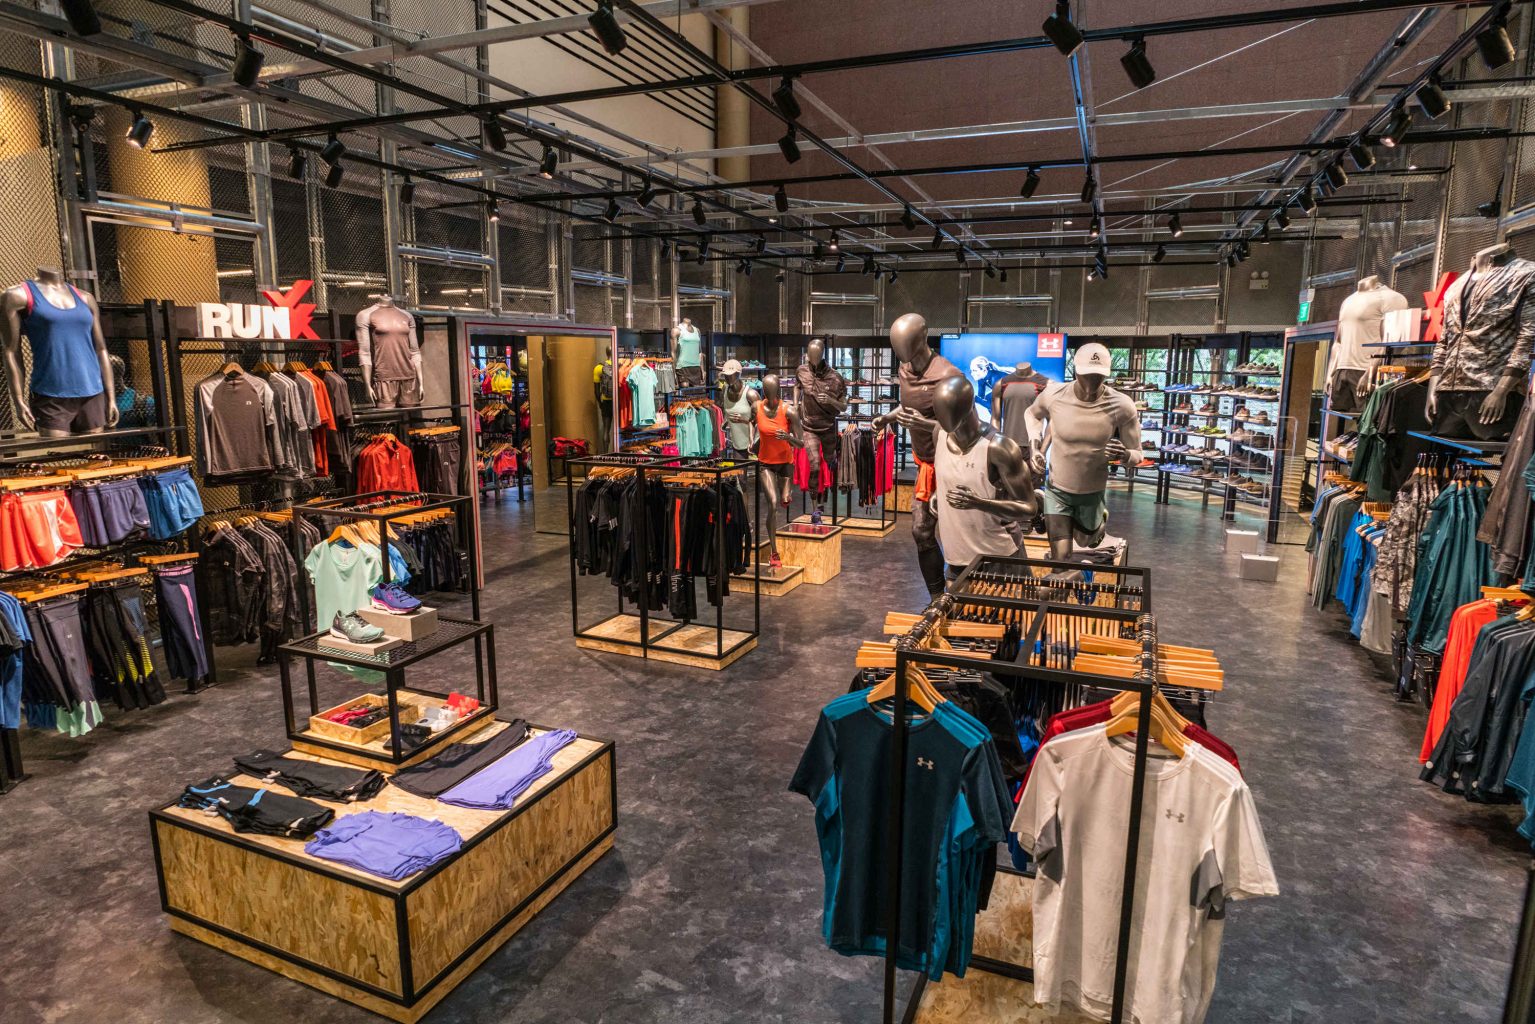 Get Shopping At The TripleFit Retail Zone | AugustMan Singapore